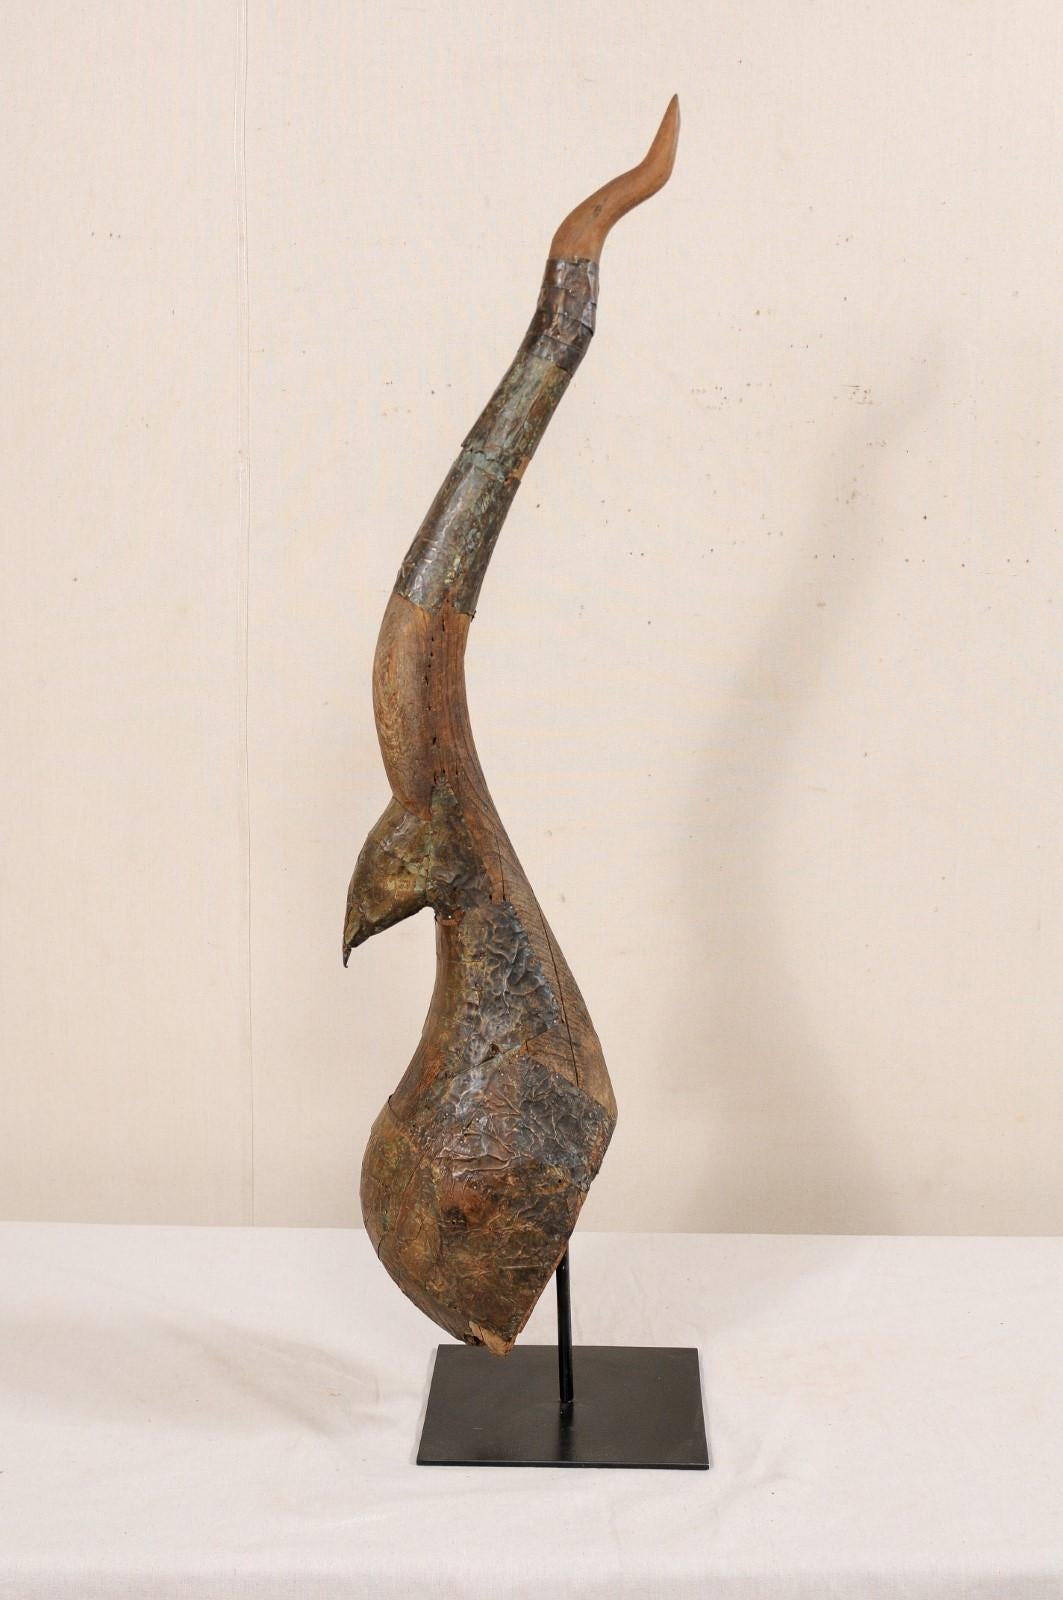 An antique carved wood chofa from Thailand, presented on custom iron stand. This elegant Thai finial, from the turn of the 19th and 20th centuries, is referred to as a 